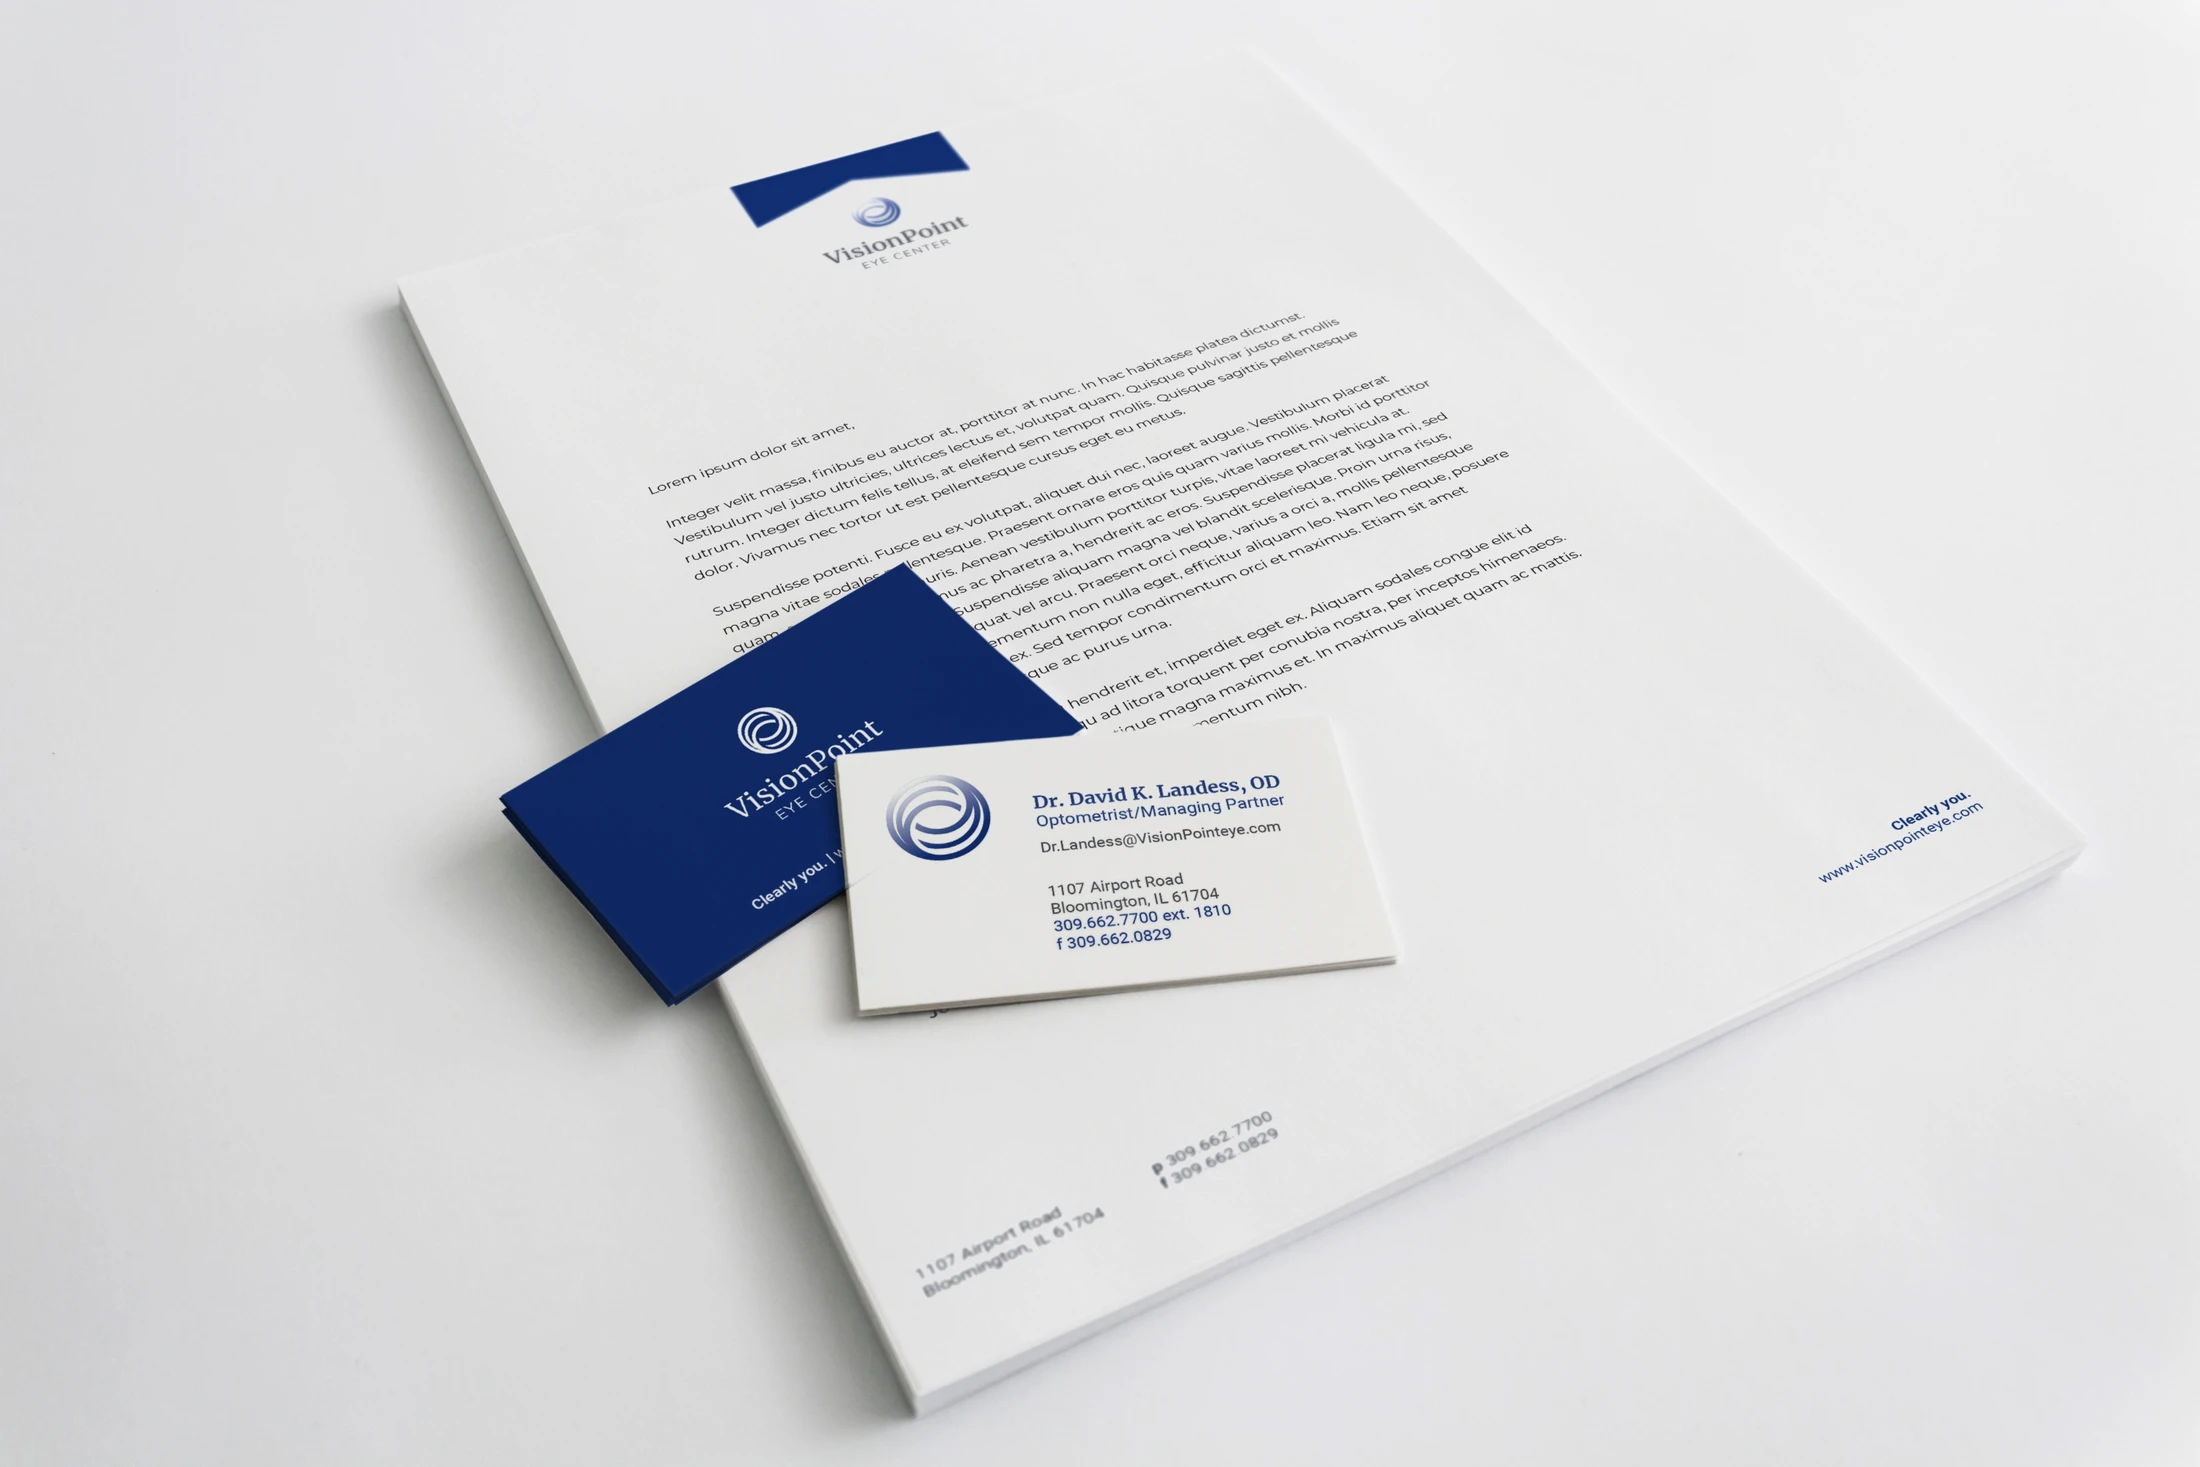 A business card and letterhead on a white surface.